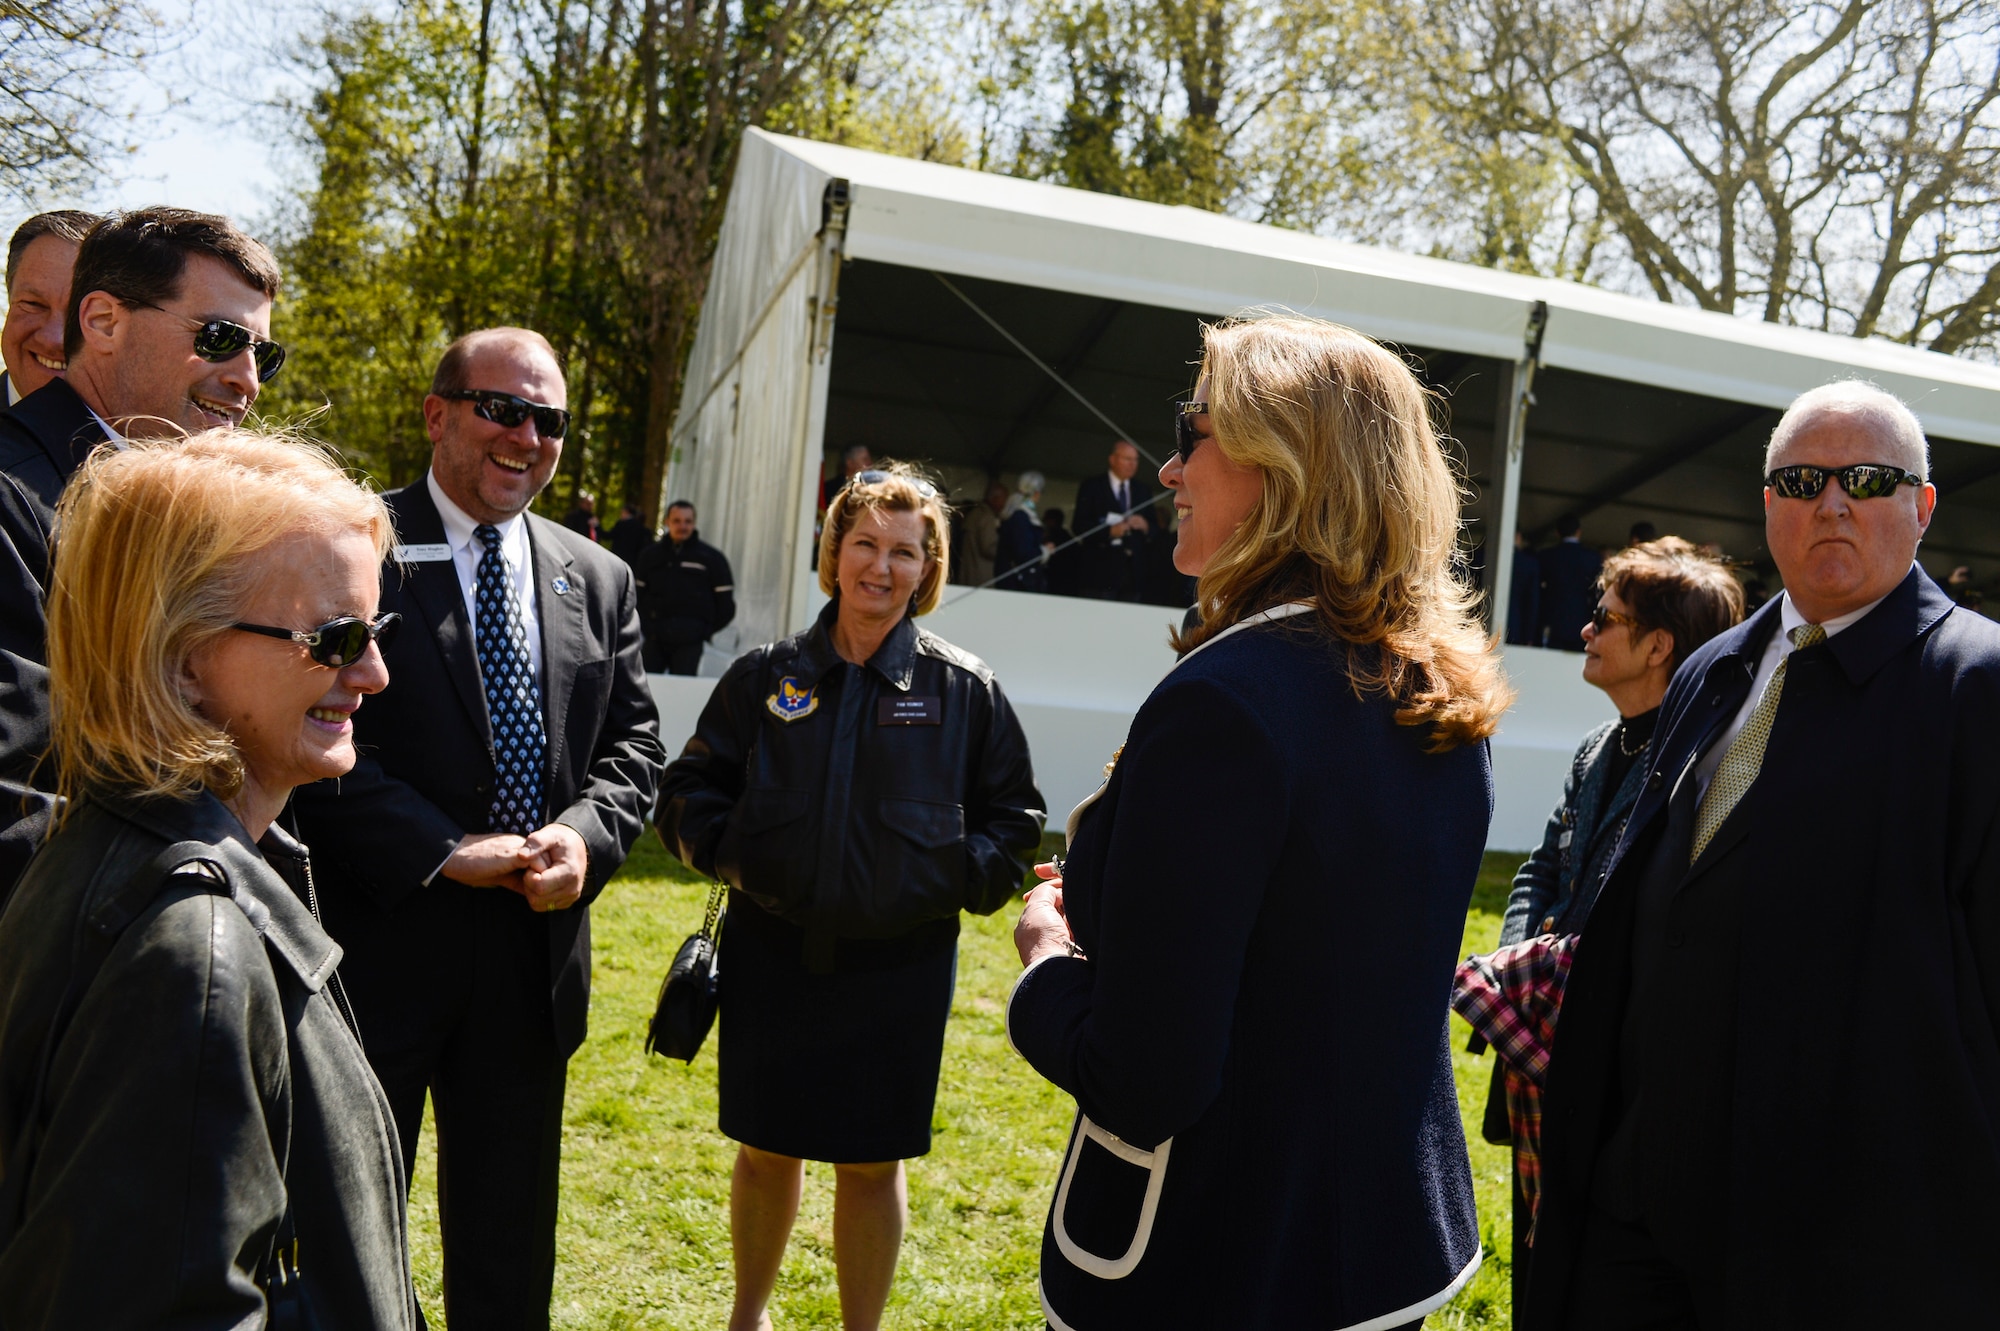 PARIS -- Secretary of the Air Force, Deborah Lee James, speaks with a group of Air Force civic leaders, unpaid advisors, key communicators and advocates for the Air Force, after the Lafayette Escadrille Memorial 100th anniversary ceremony in Marnes-la-Coquette, France, April 20, 2016. (U.S. Air Force Photo by Tech. Sgt. Joshua DeMotts/Released)